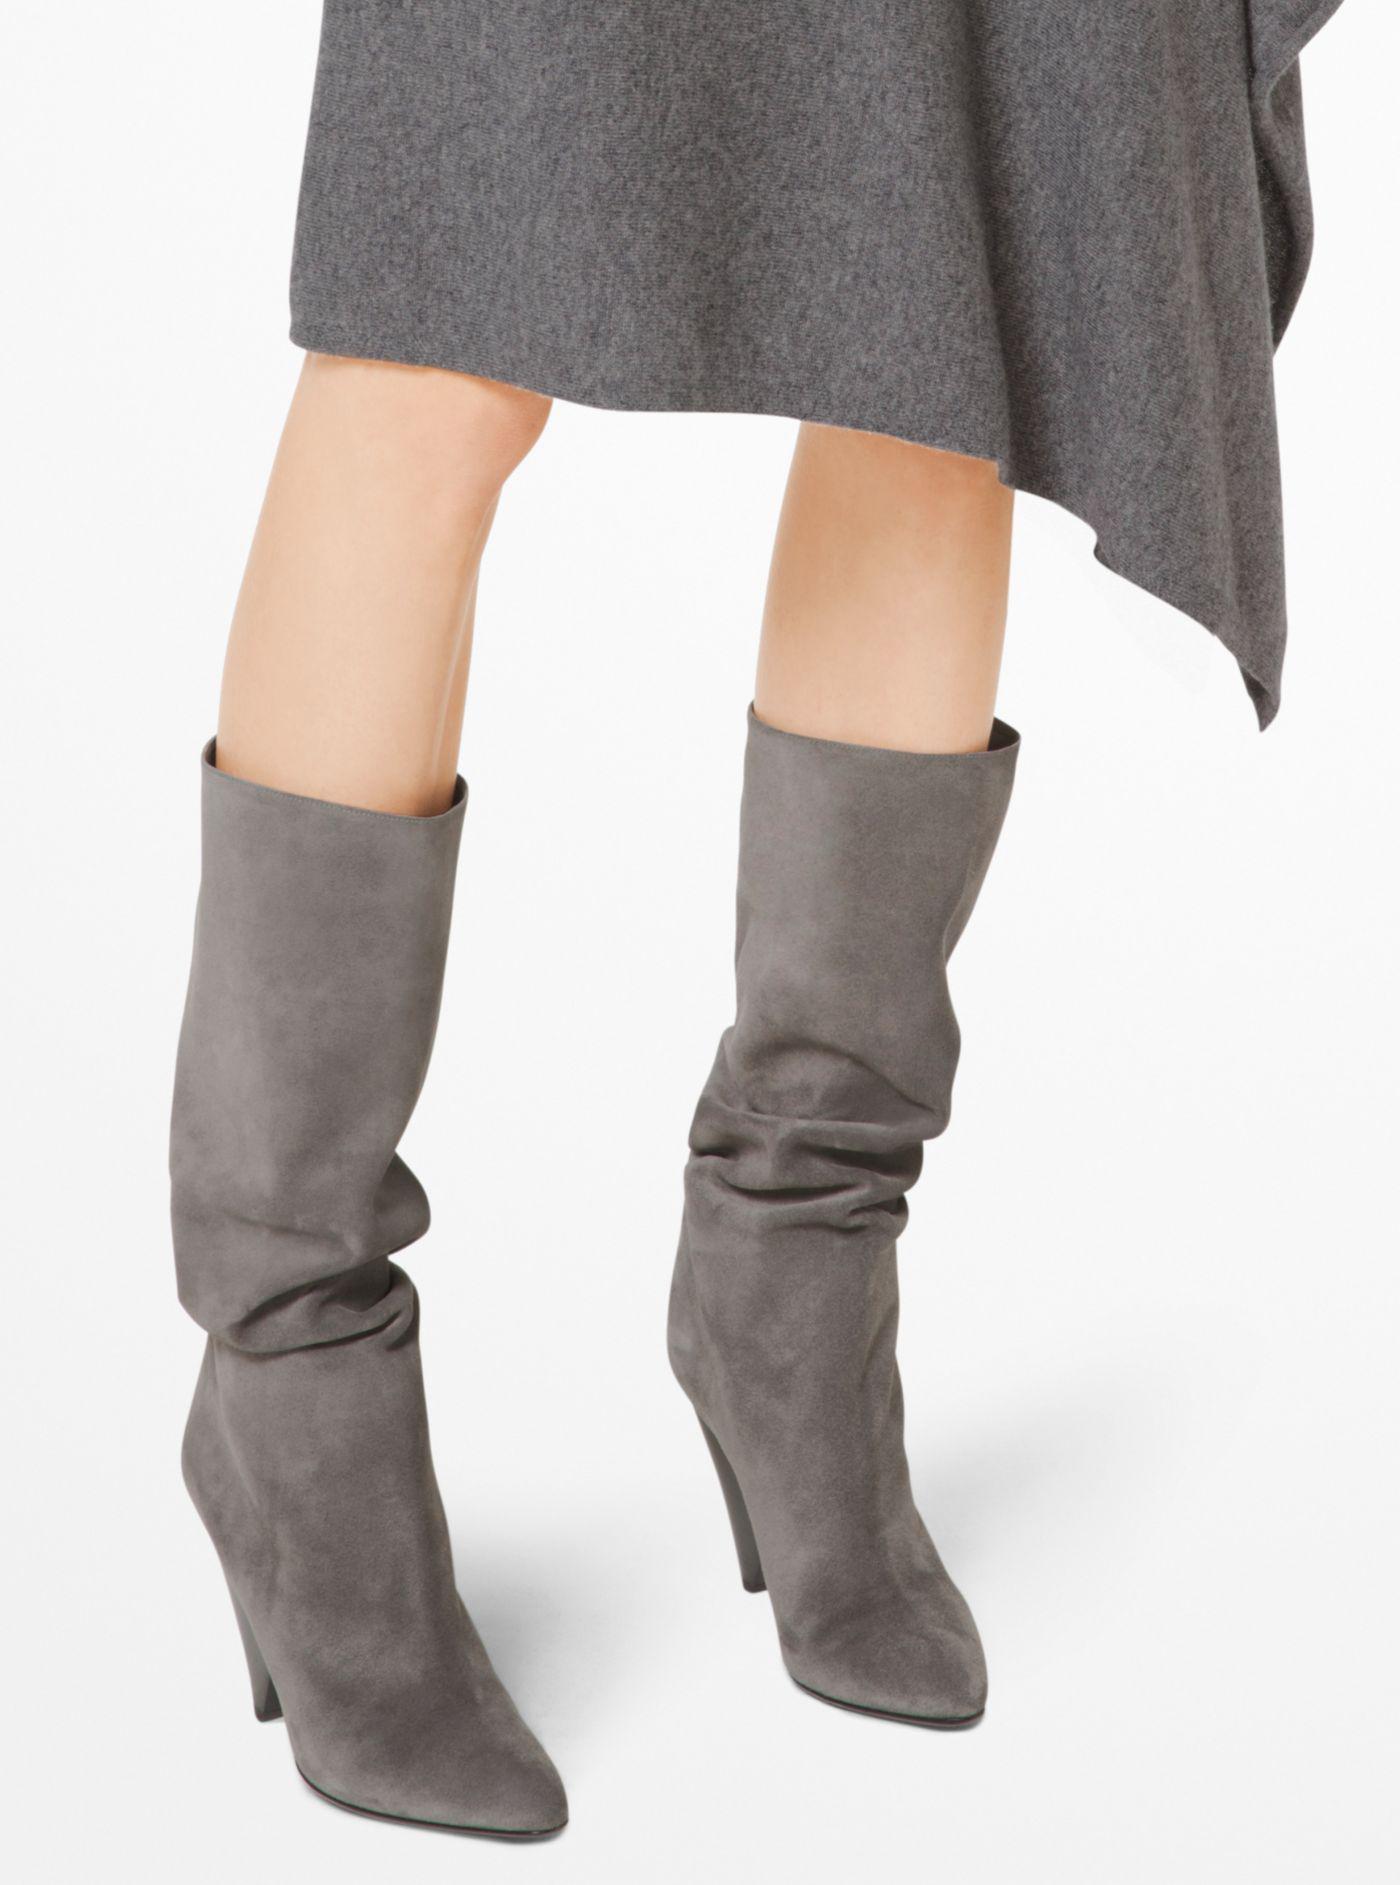 michael kors thigh high suede boots